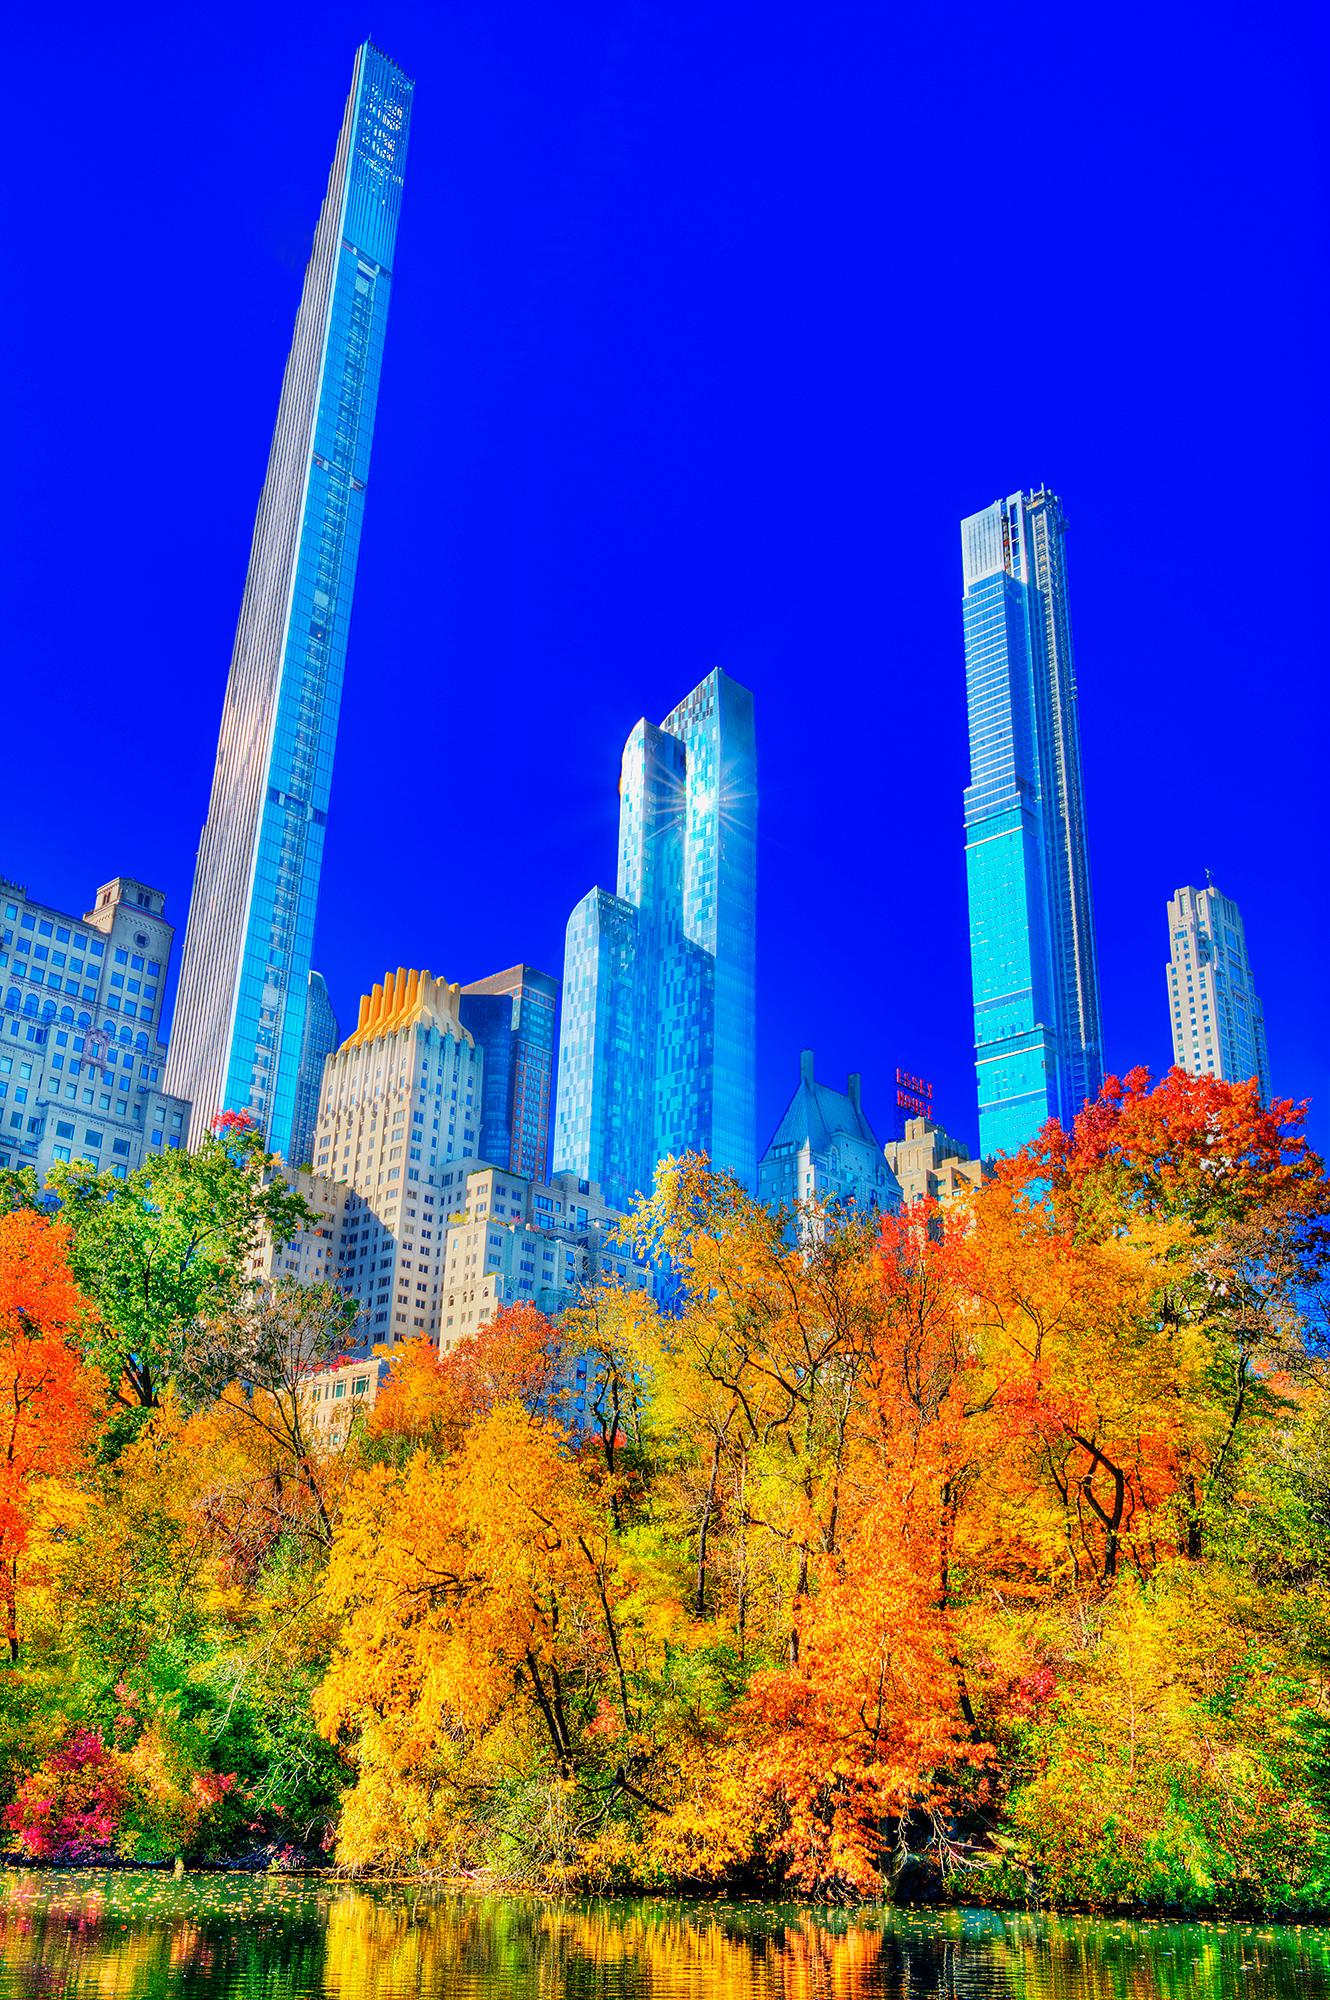 Mitchell Funk Color Photograph -  Central Park In Autumn With Billionaires Row Skyscrapers. Surreal City